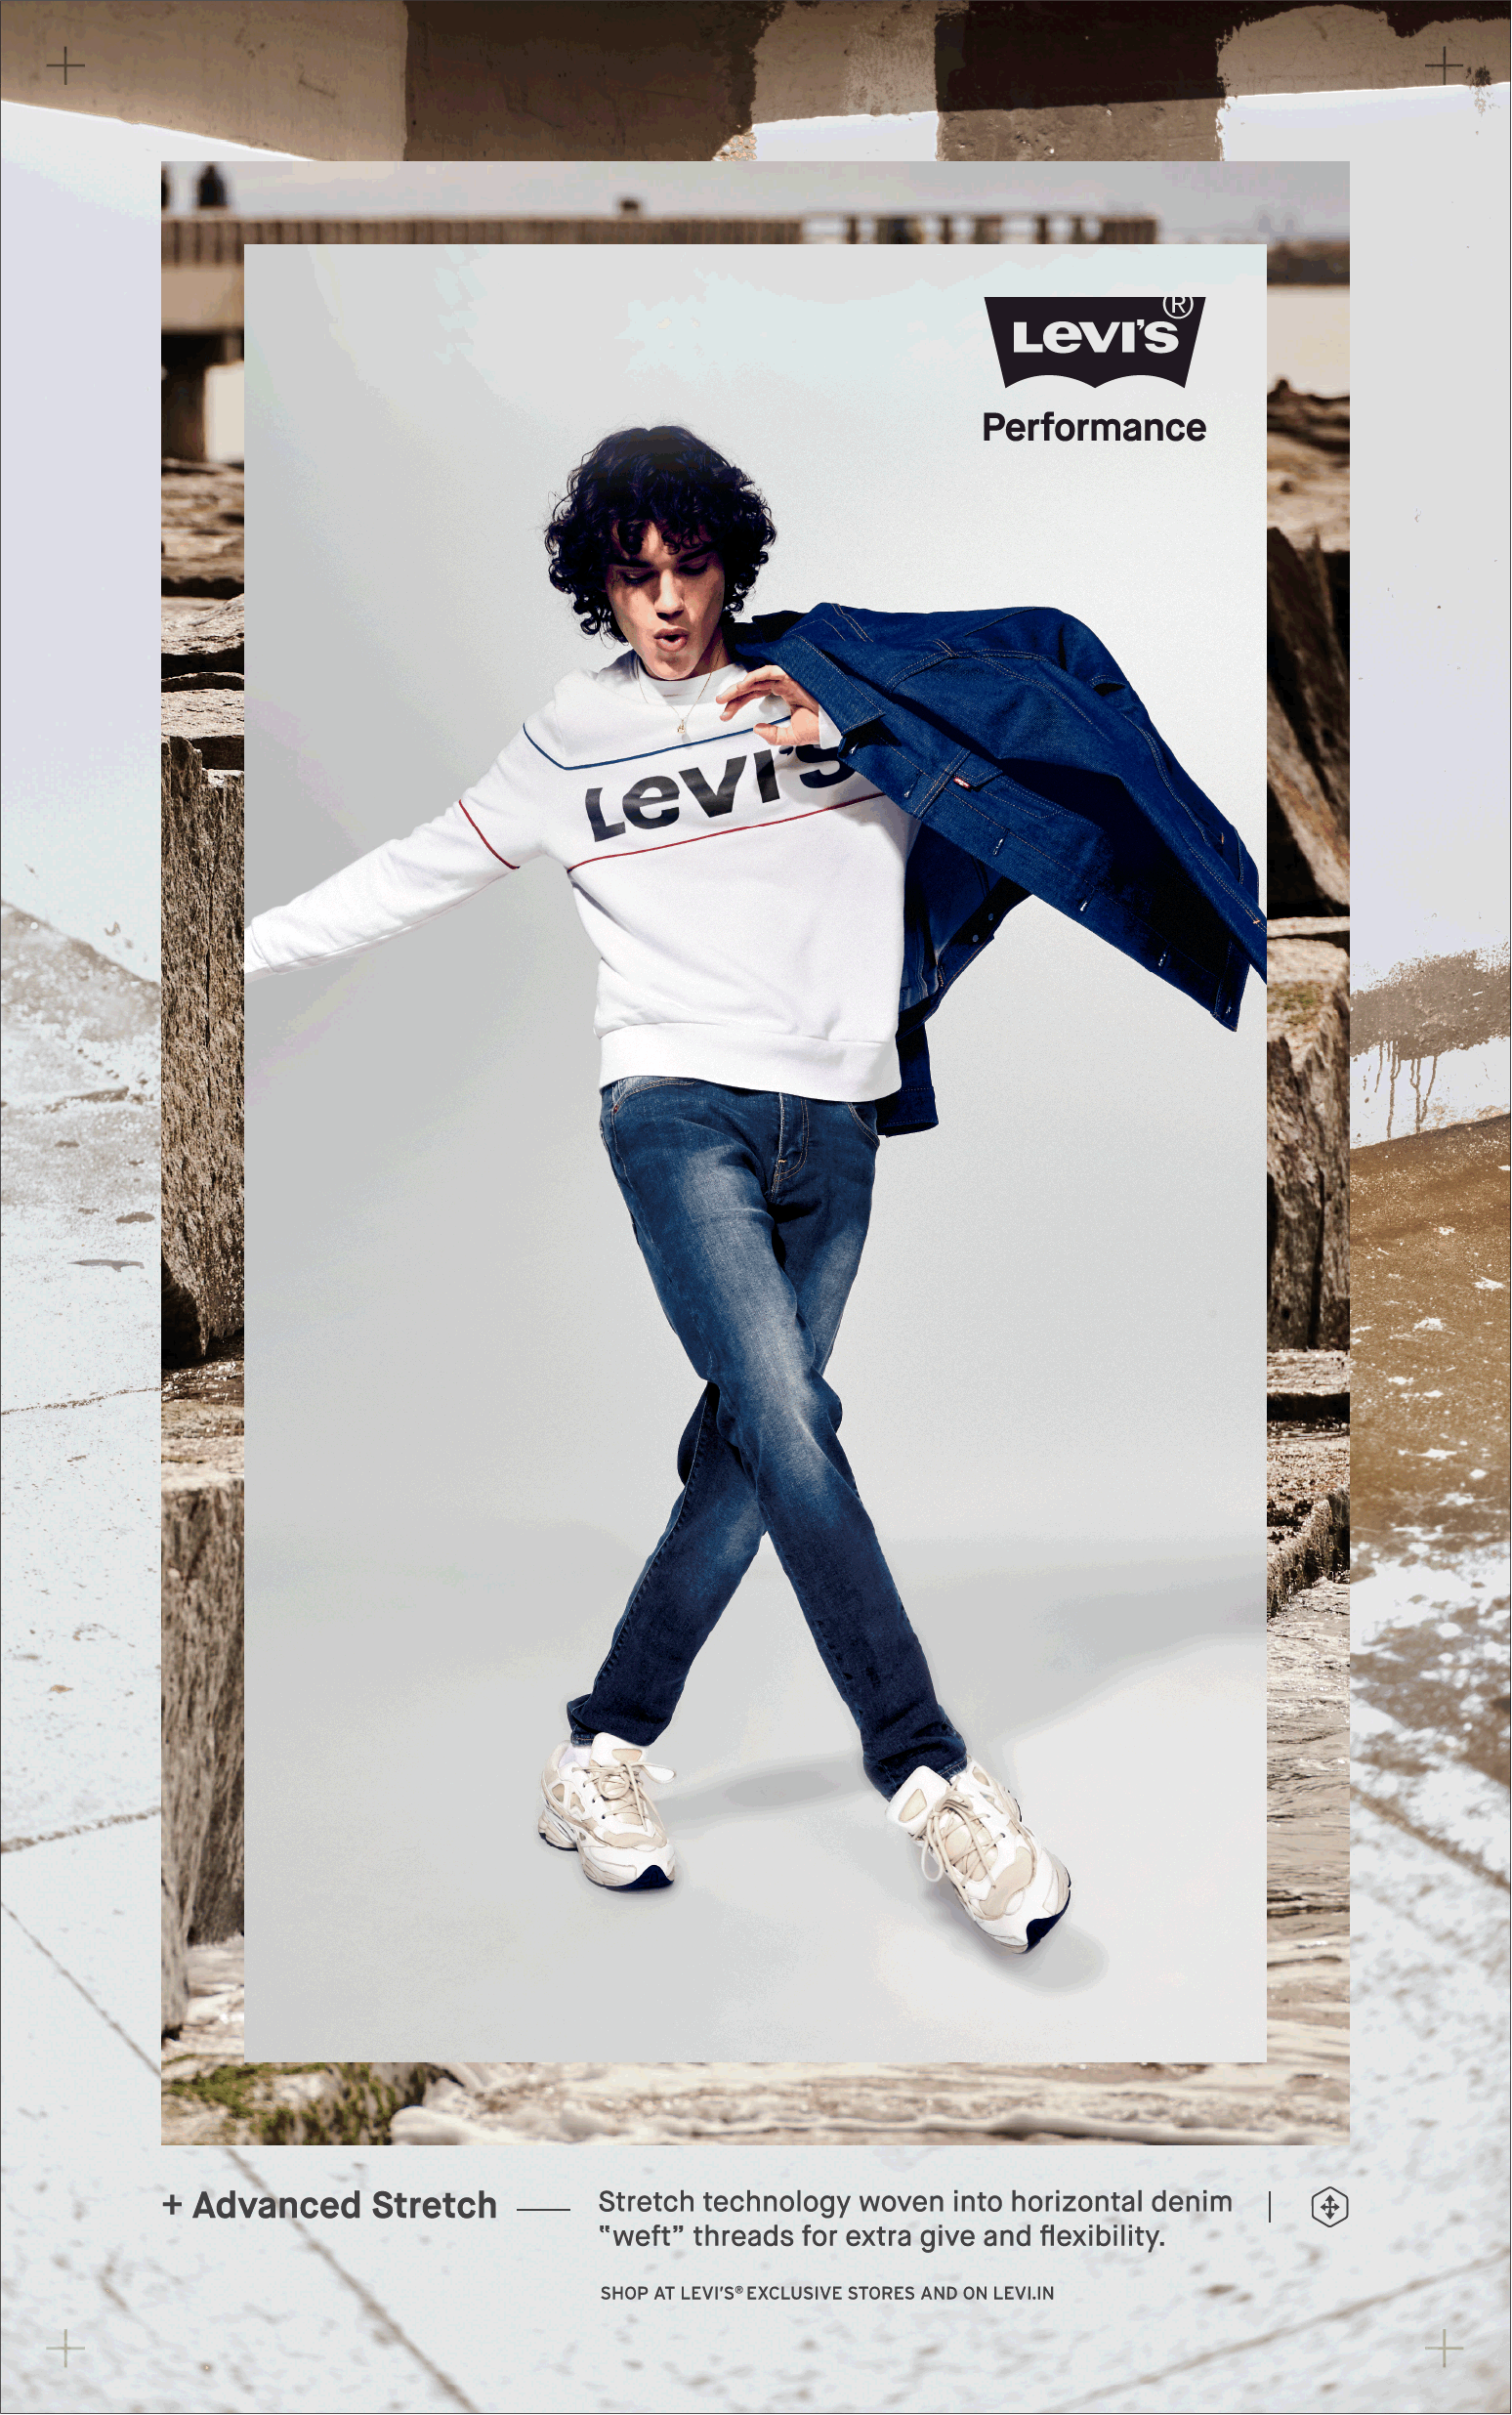 Levis Clothing Performance Advanced Stretch Ad Times Of India